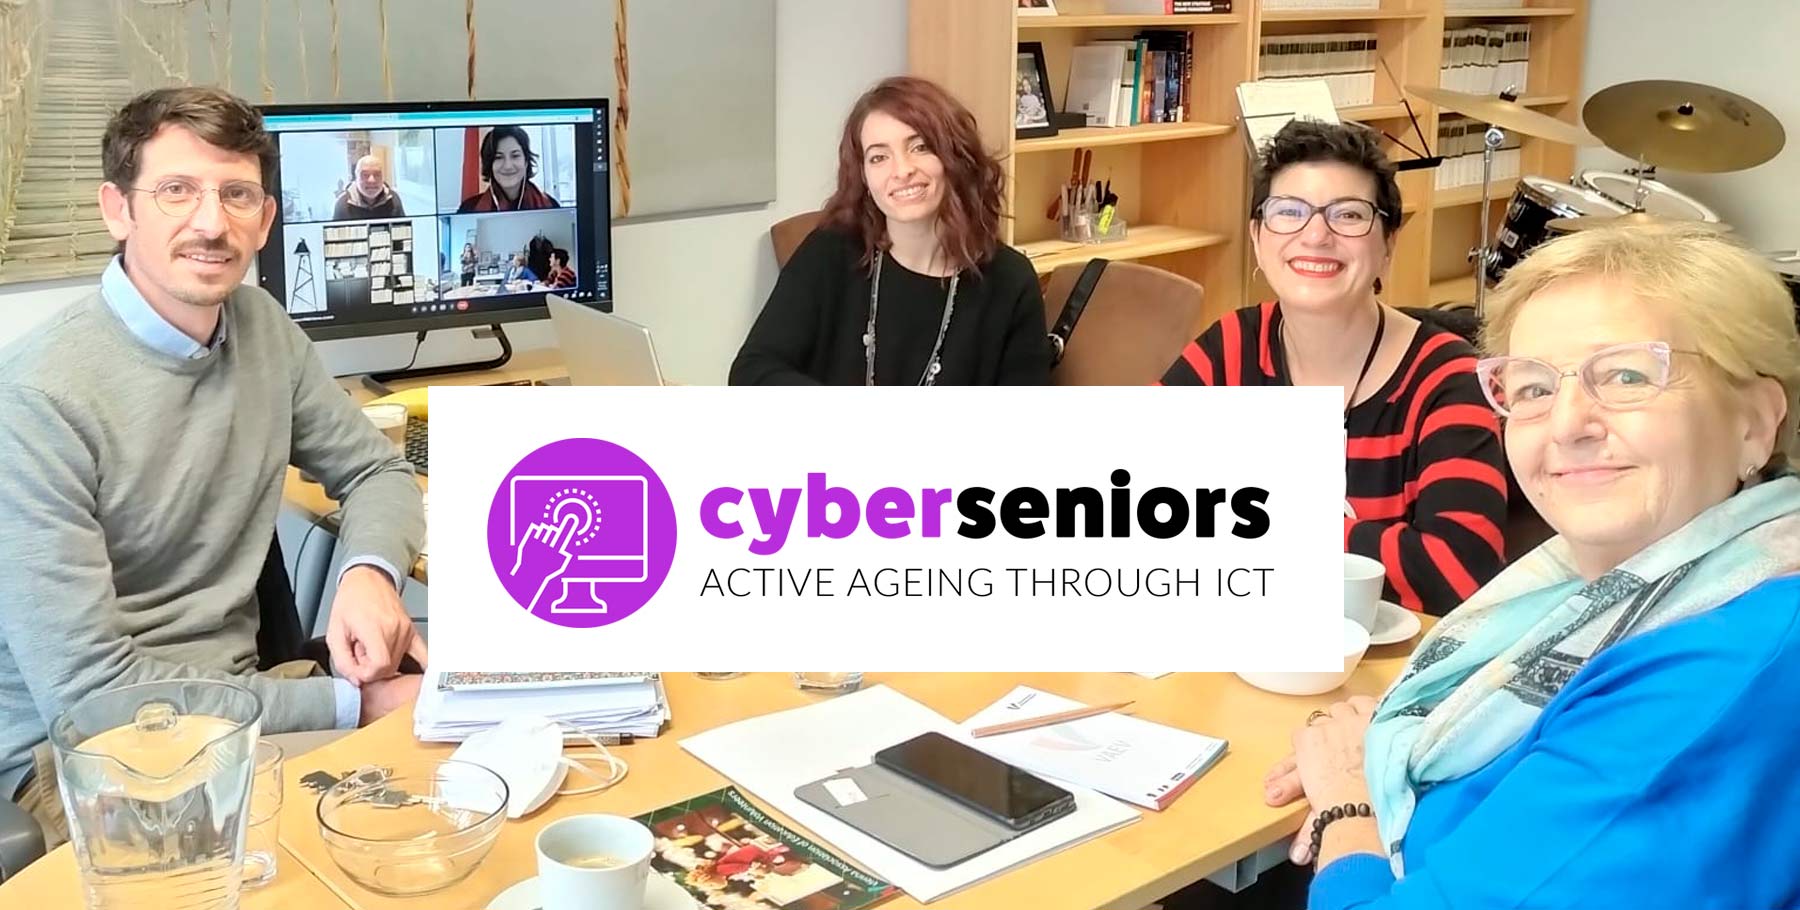 Cyberseniors project meeting in Austria: Open digital resources for active aging in Europe